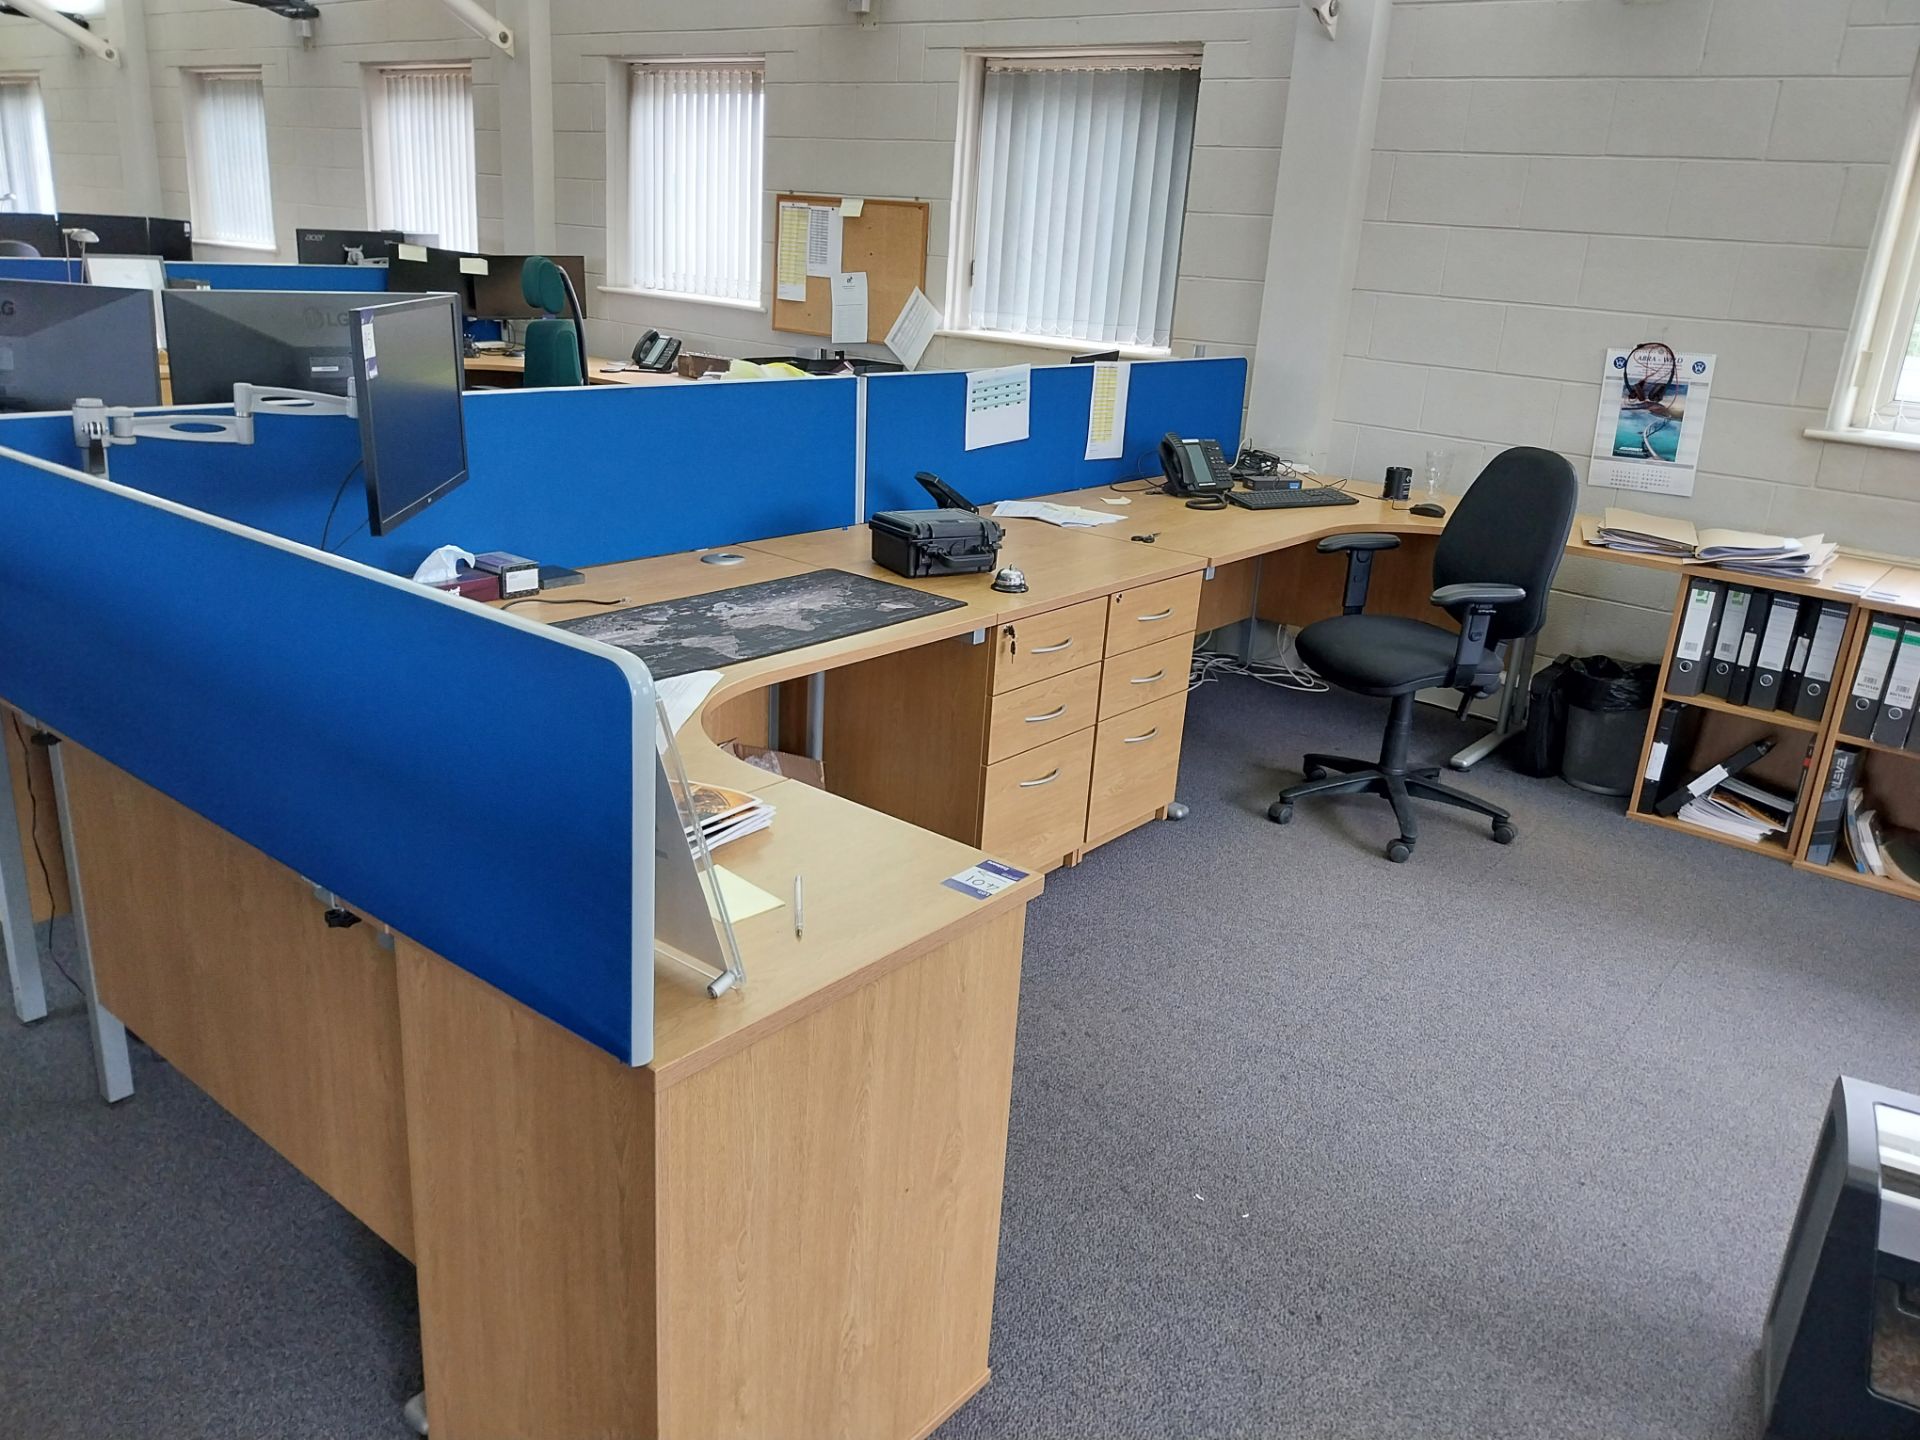 4 x oak effect cantilever desks with 4 x pedestals, 4 x privacy screens, 3 chairs